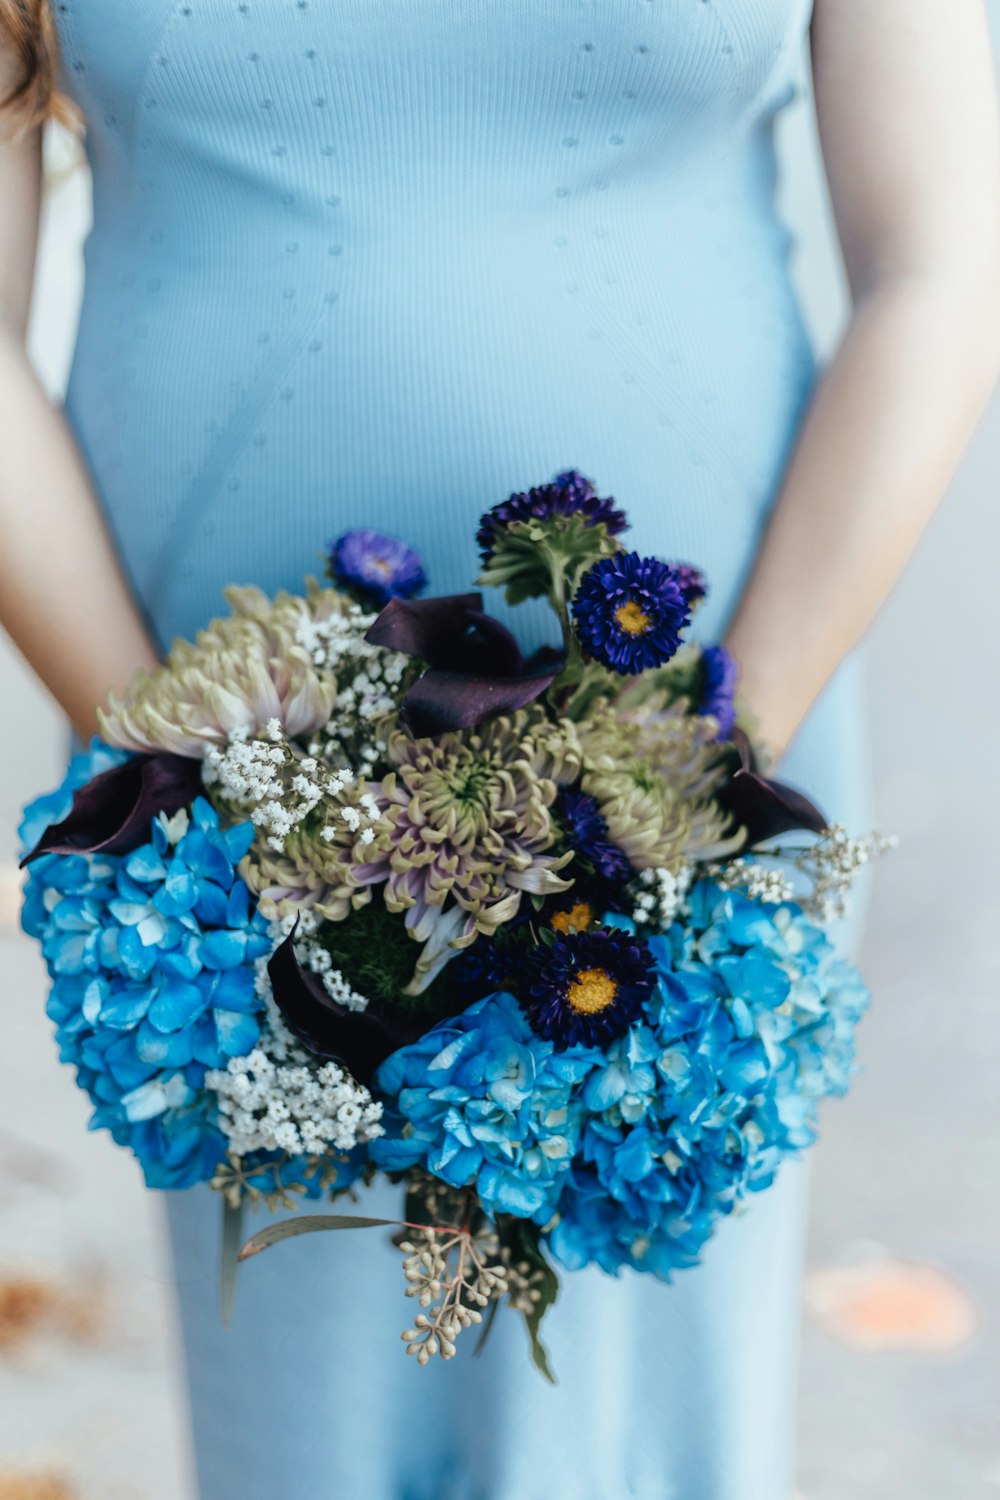 person wearing blue dress holding flowers